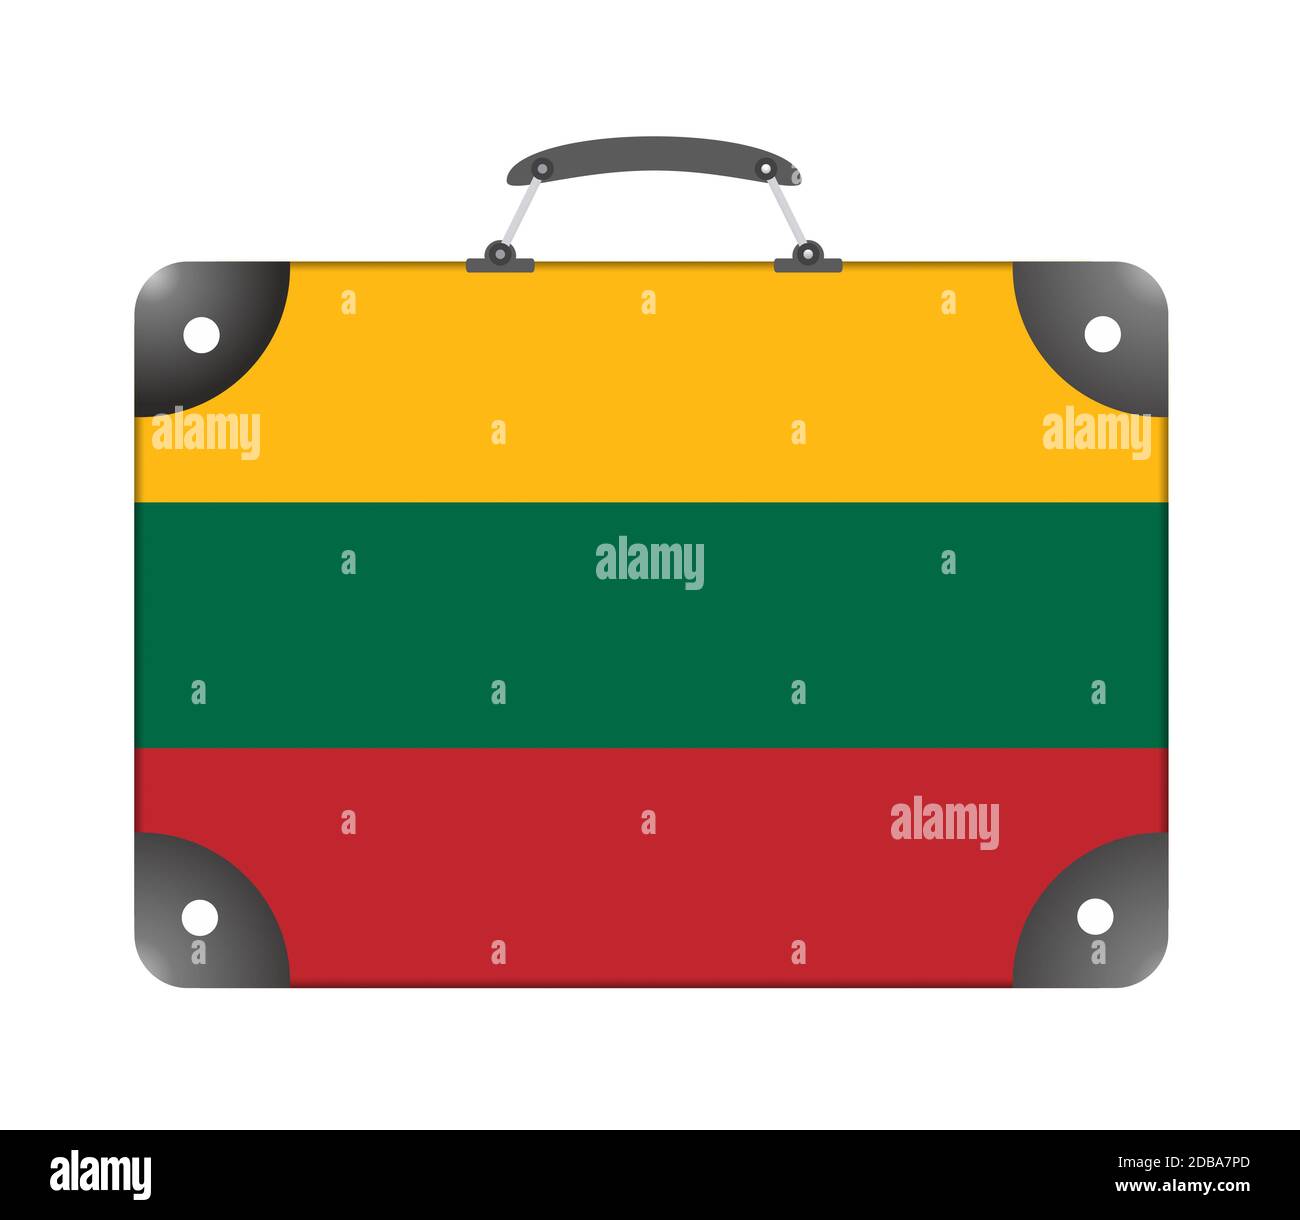 Flag of the country lithuania in the form of a travel suitcase on a white background - illustration Stock Photo